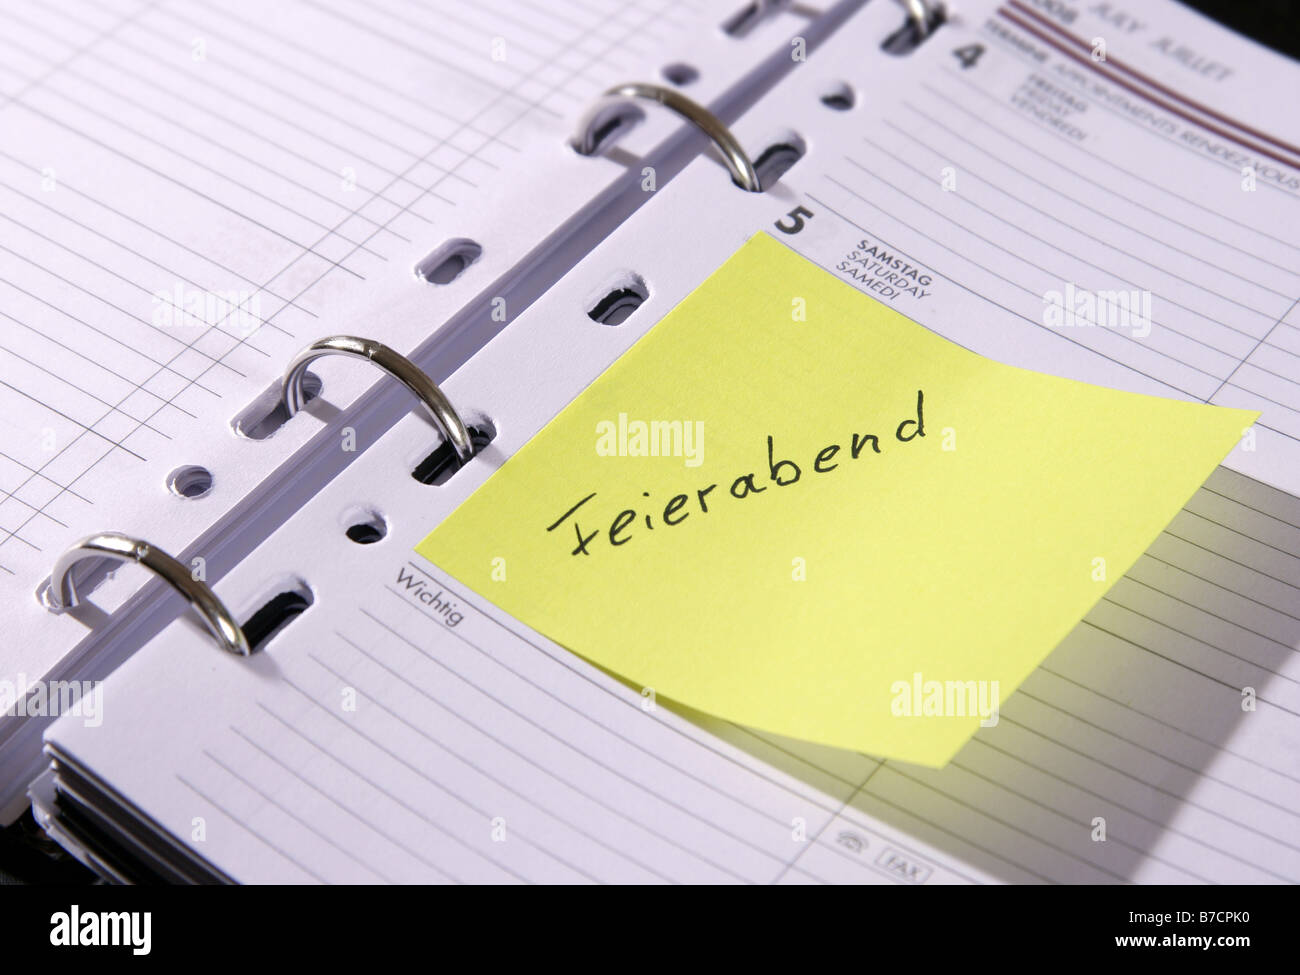 appointment book 'Feierabend', 'finishing time', Germany Stock Photo